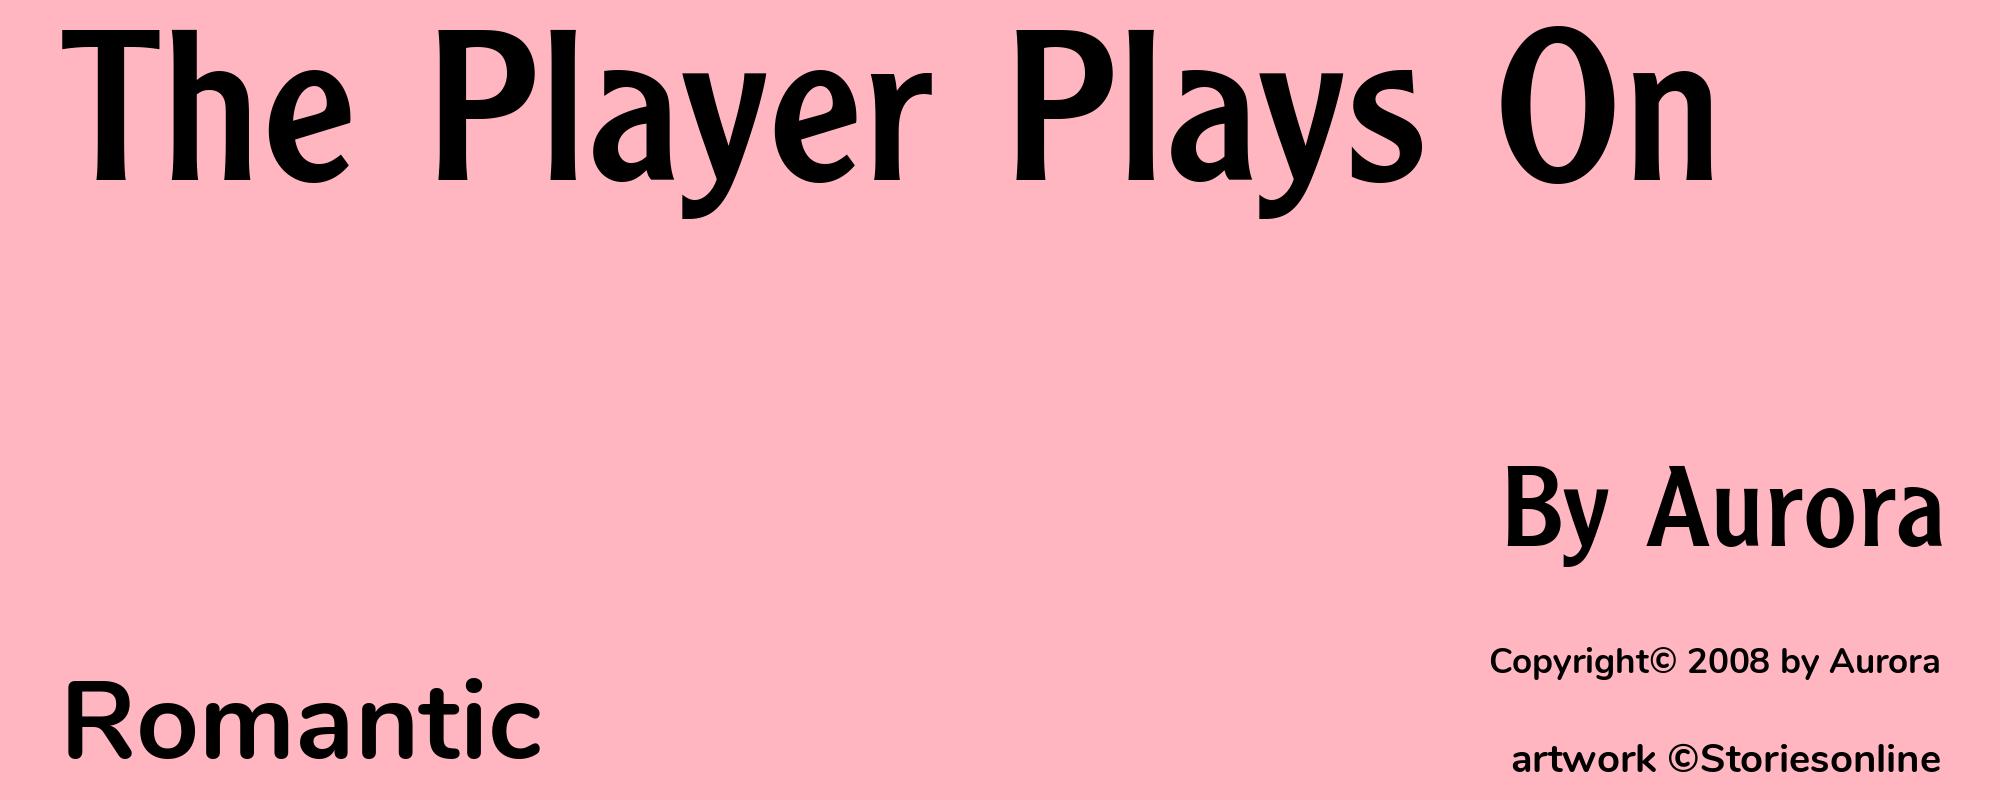 The Player Plays On - Cover